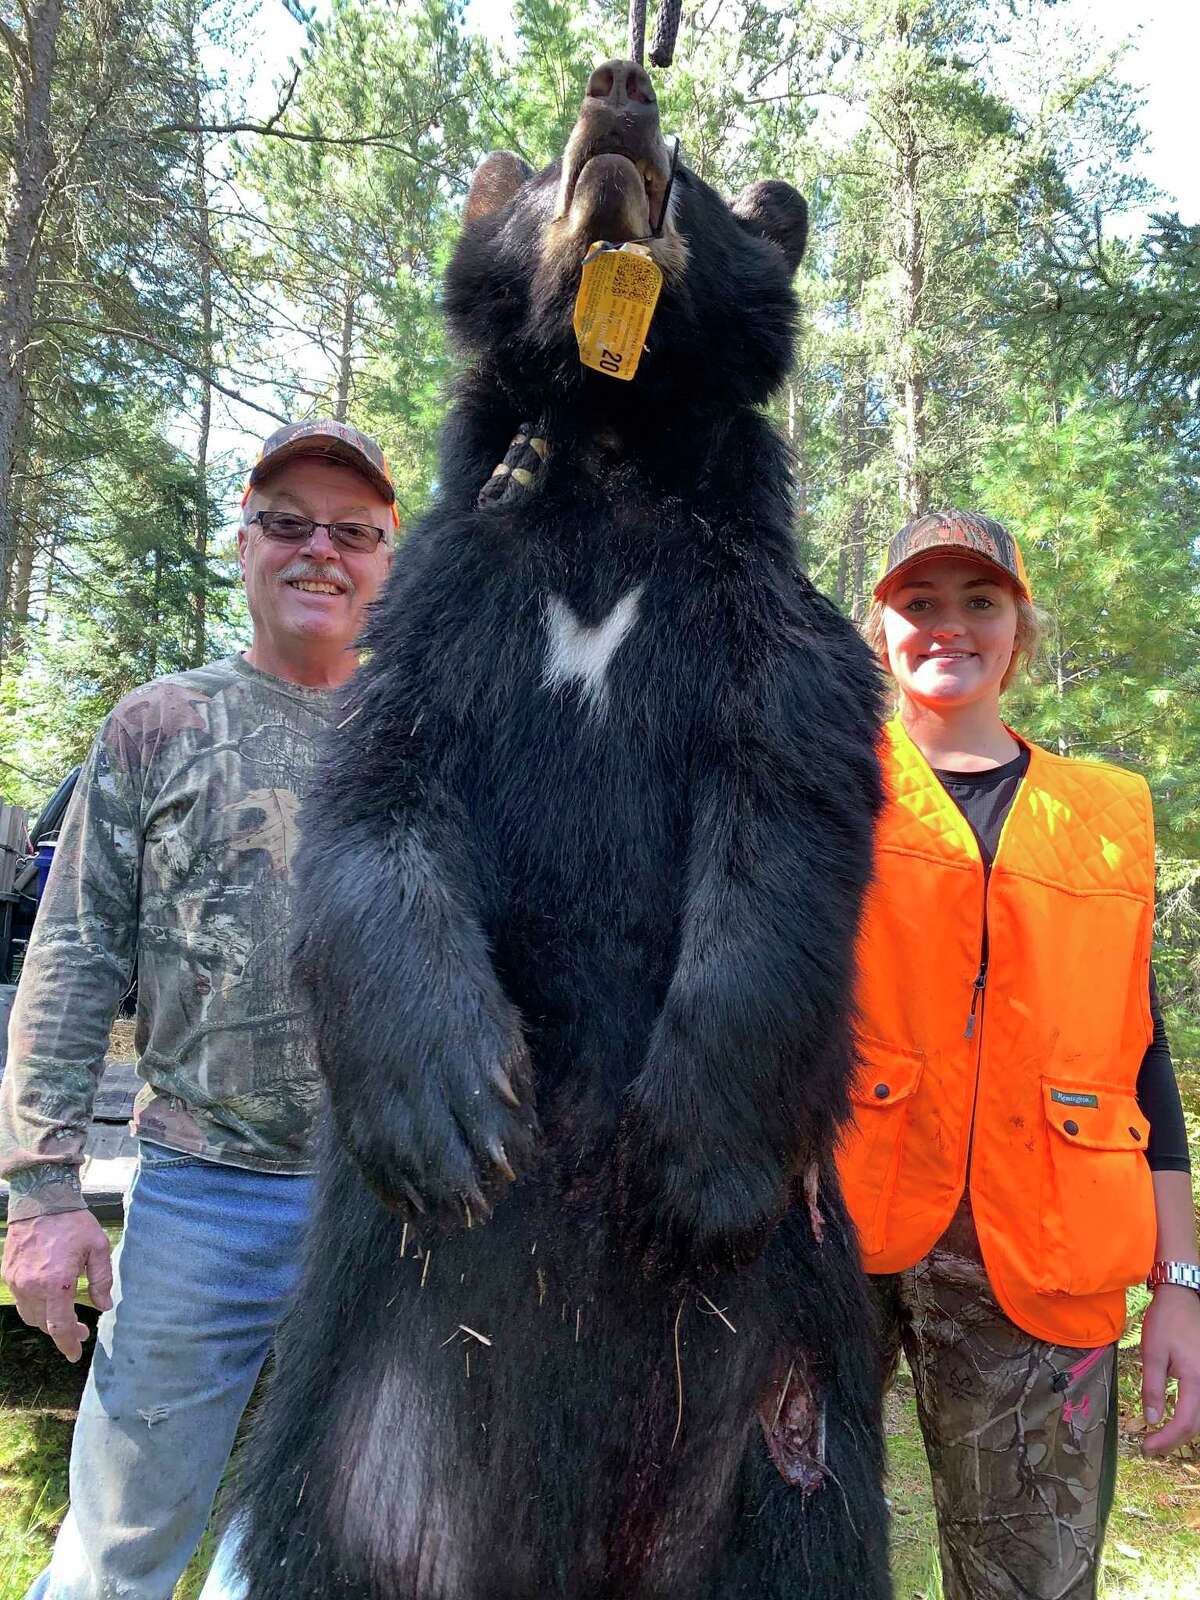 Natalie Chapman (right) of Big Rapids shows her bear along with Kip Cameron of Kip Cameron Bear Guide Services out of Newberry. (Courtesy photo)